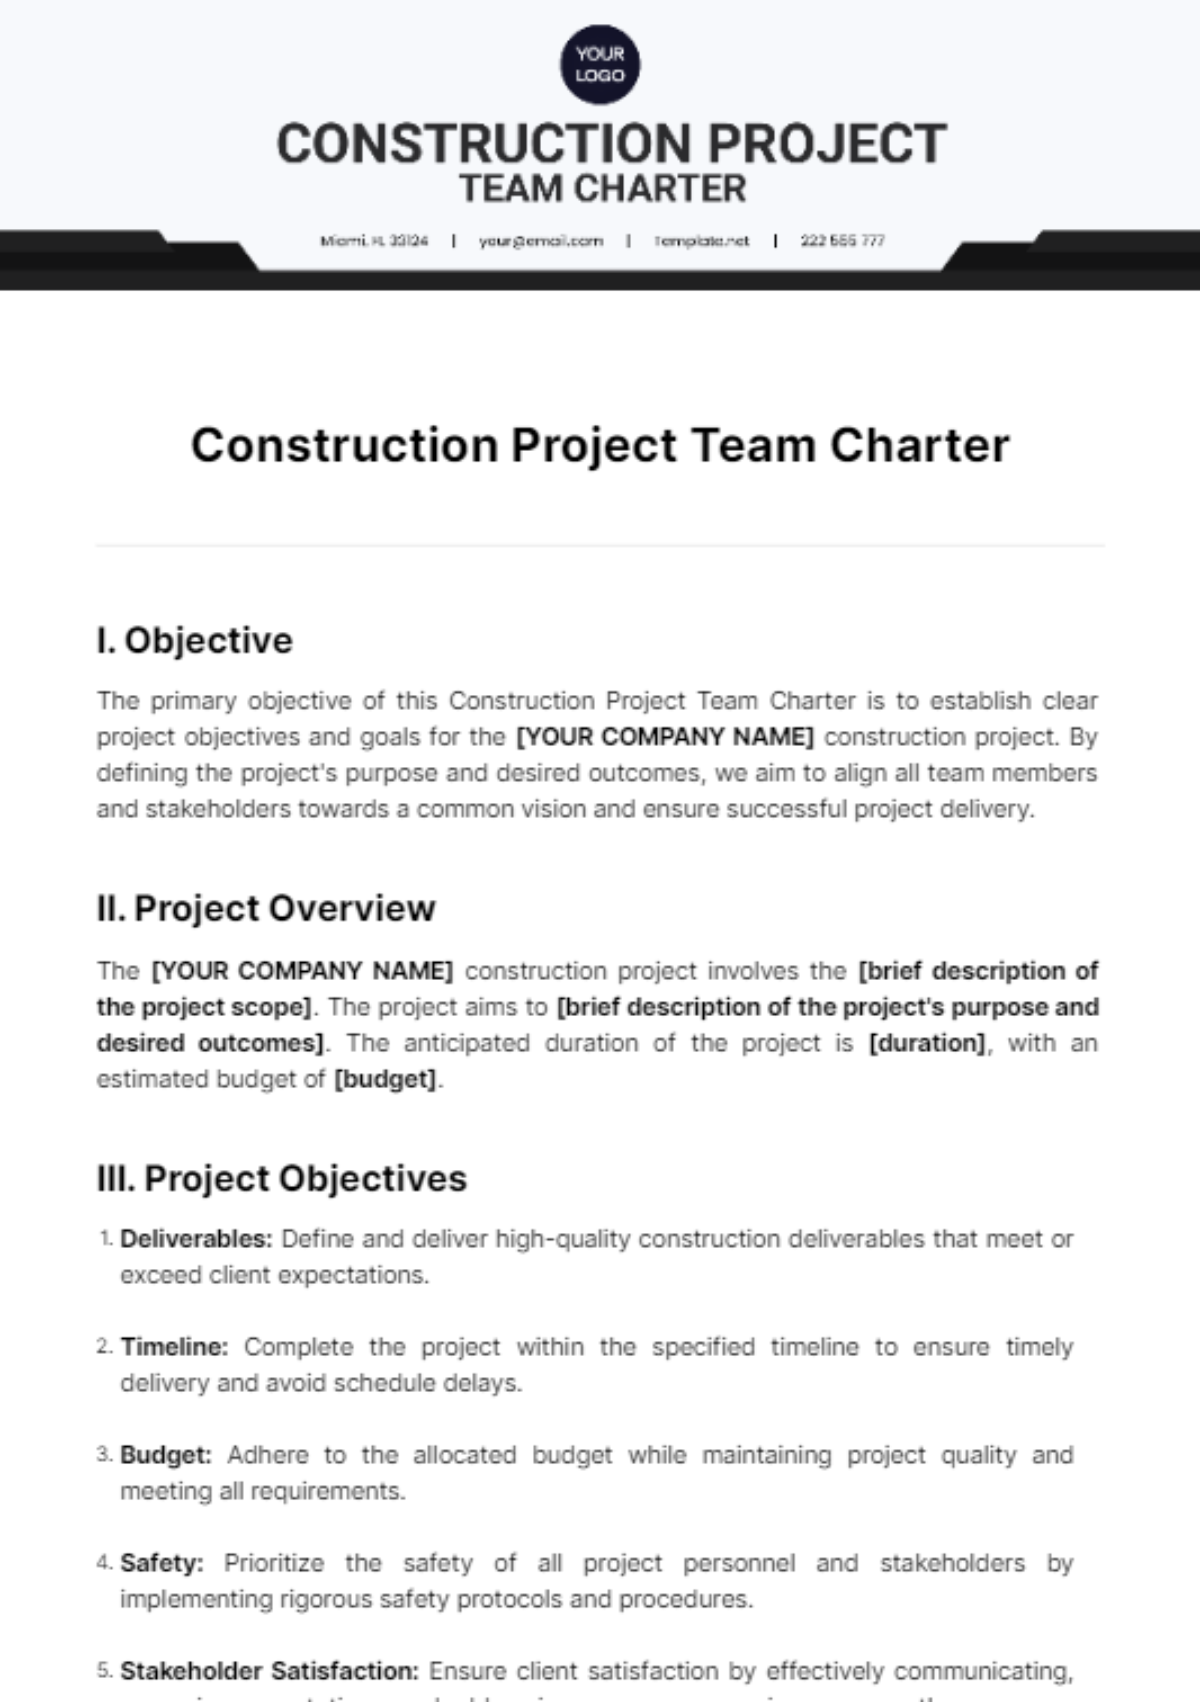 Free Construction Project Team Charter Template